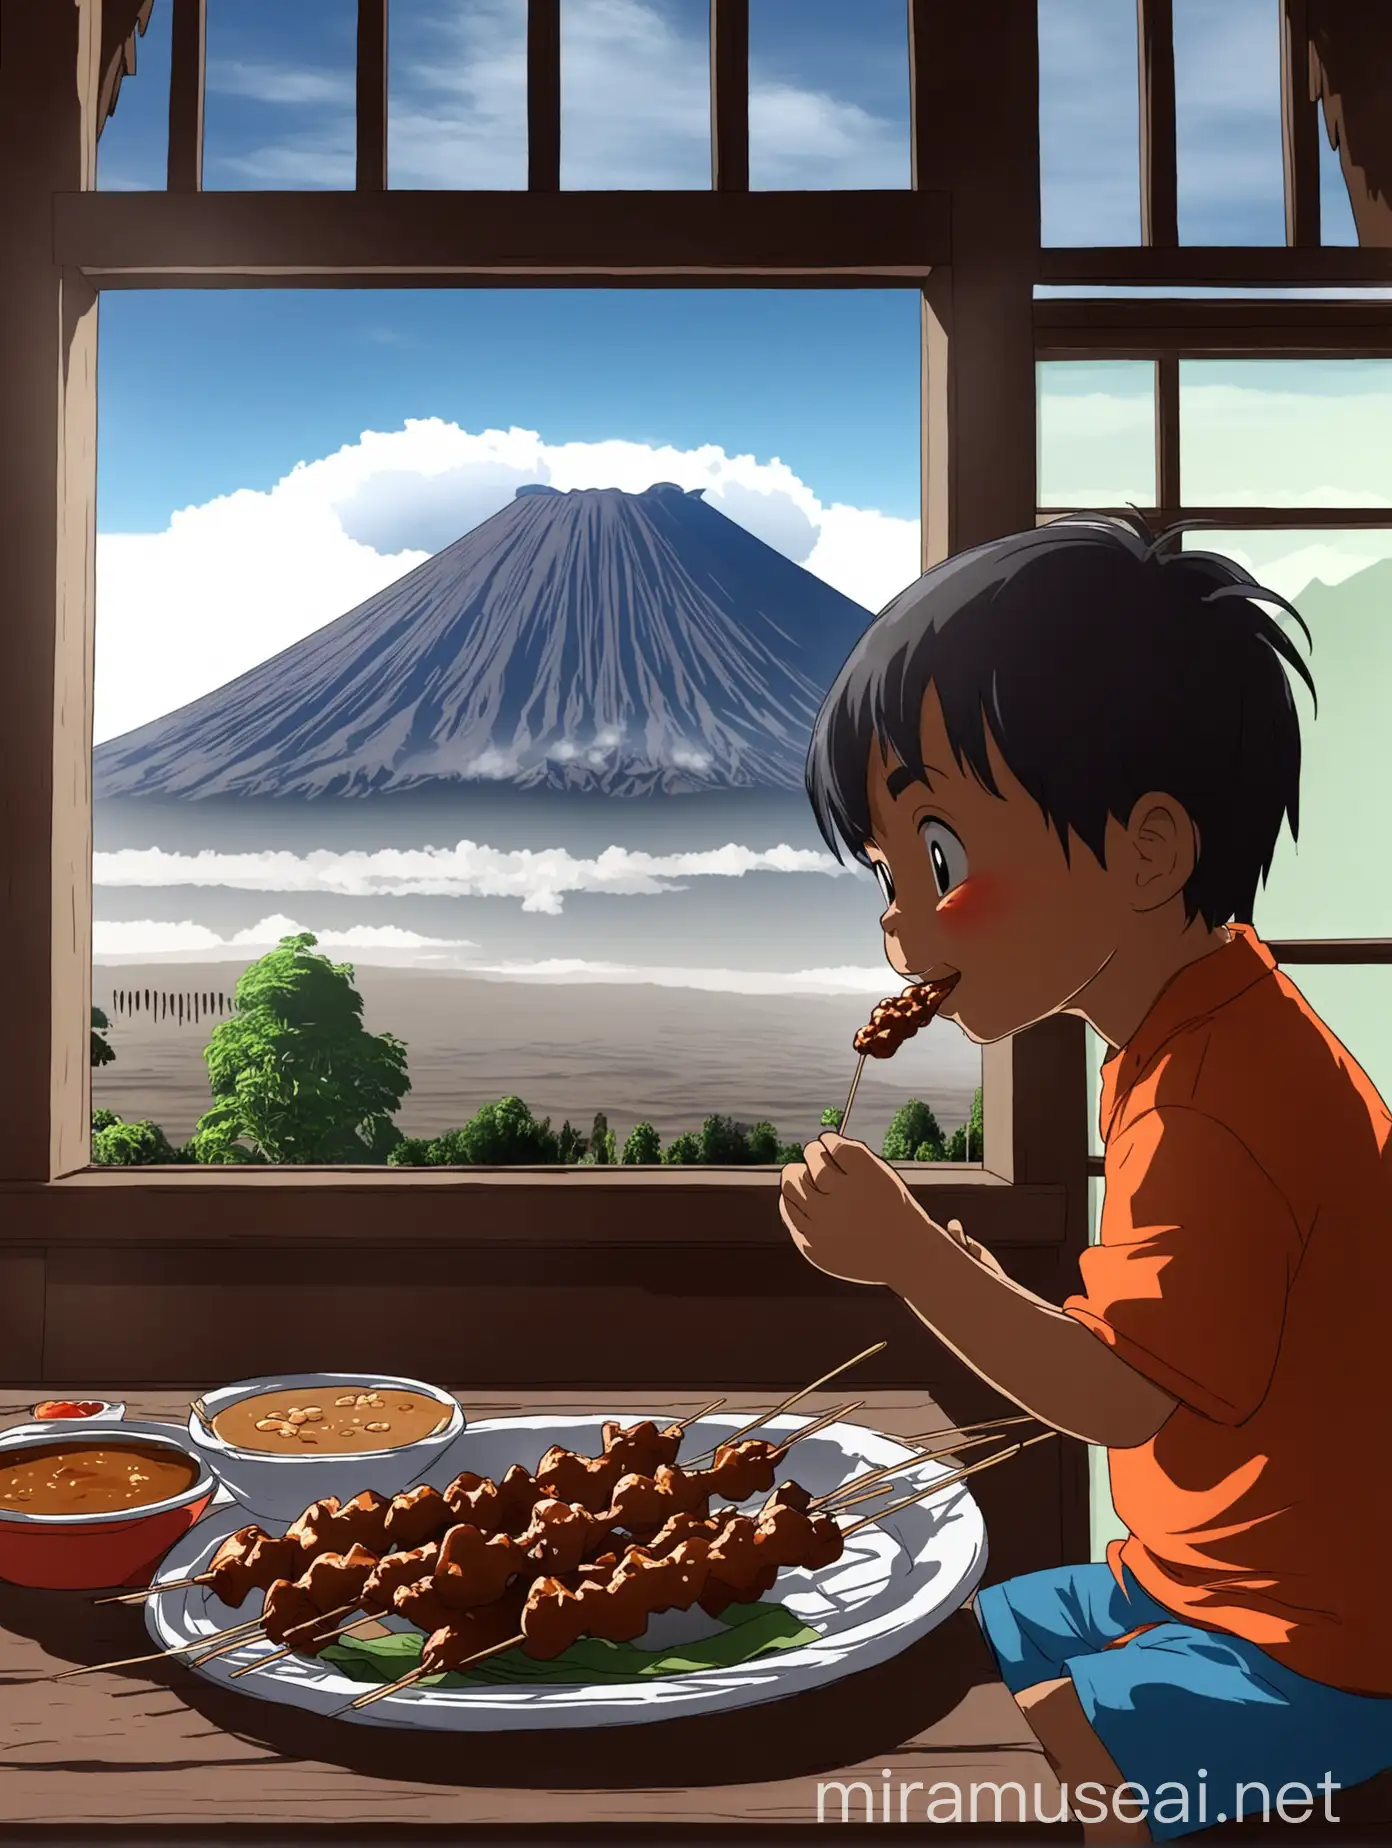 animated little boy eating satay ,inside the house with the view of Mount Bromo Indonesia in the window